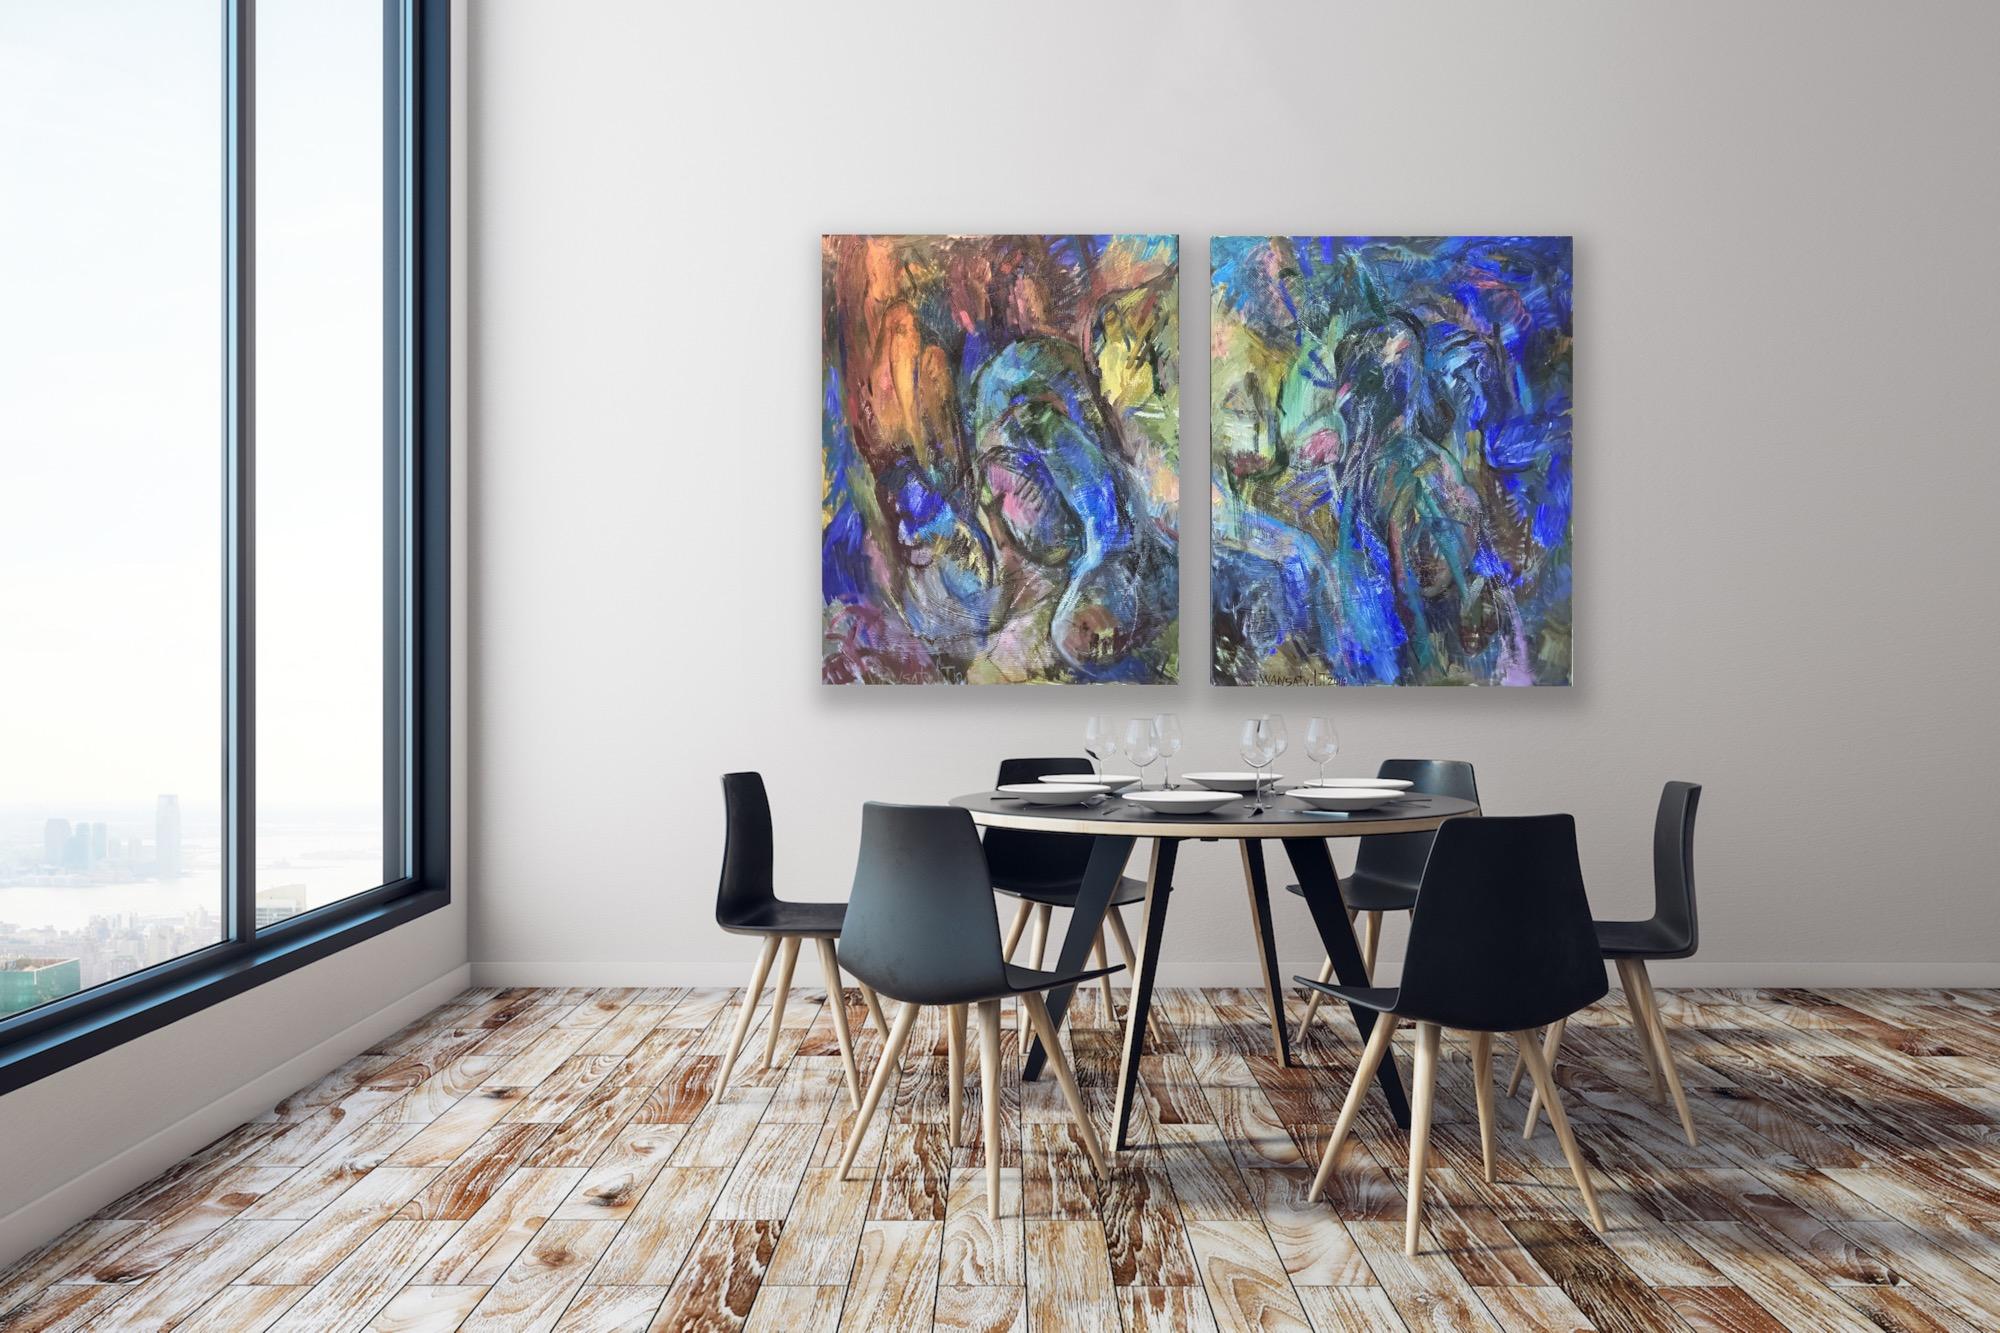 Diptych “Interaction”, 100x160cm - Gray Abstract Painting by Tatiana Levchenko